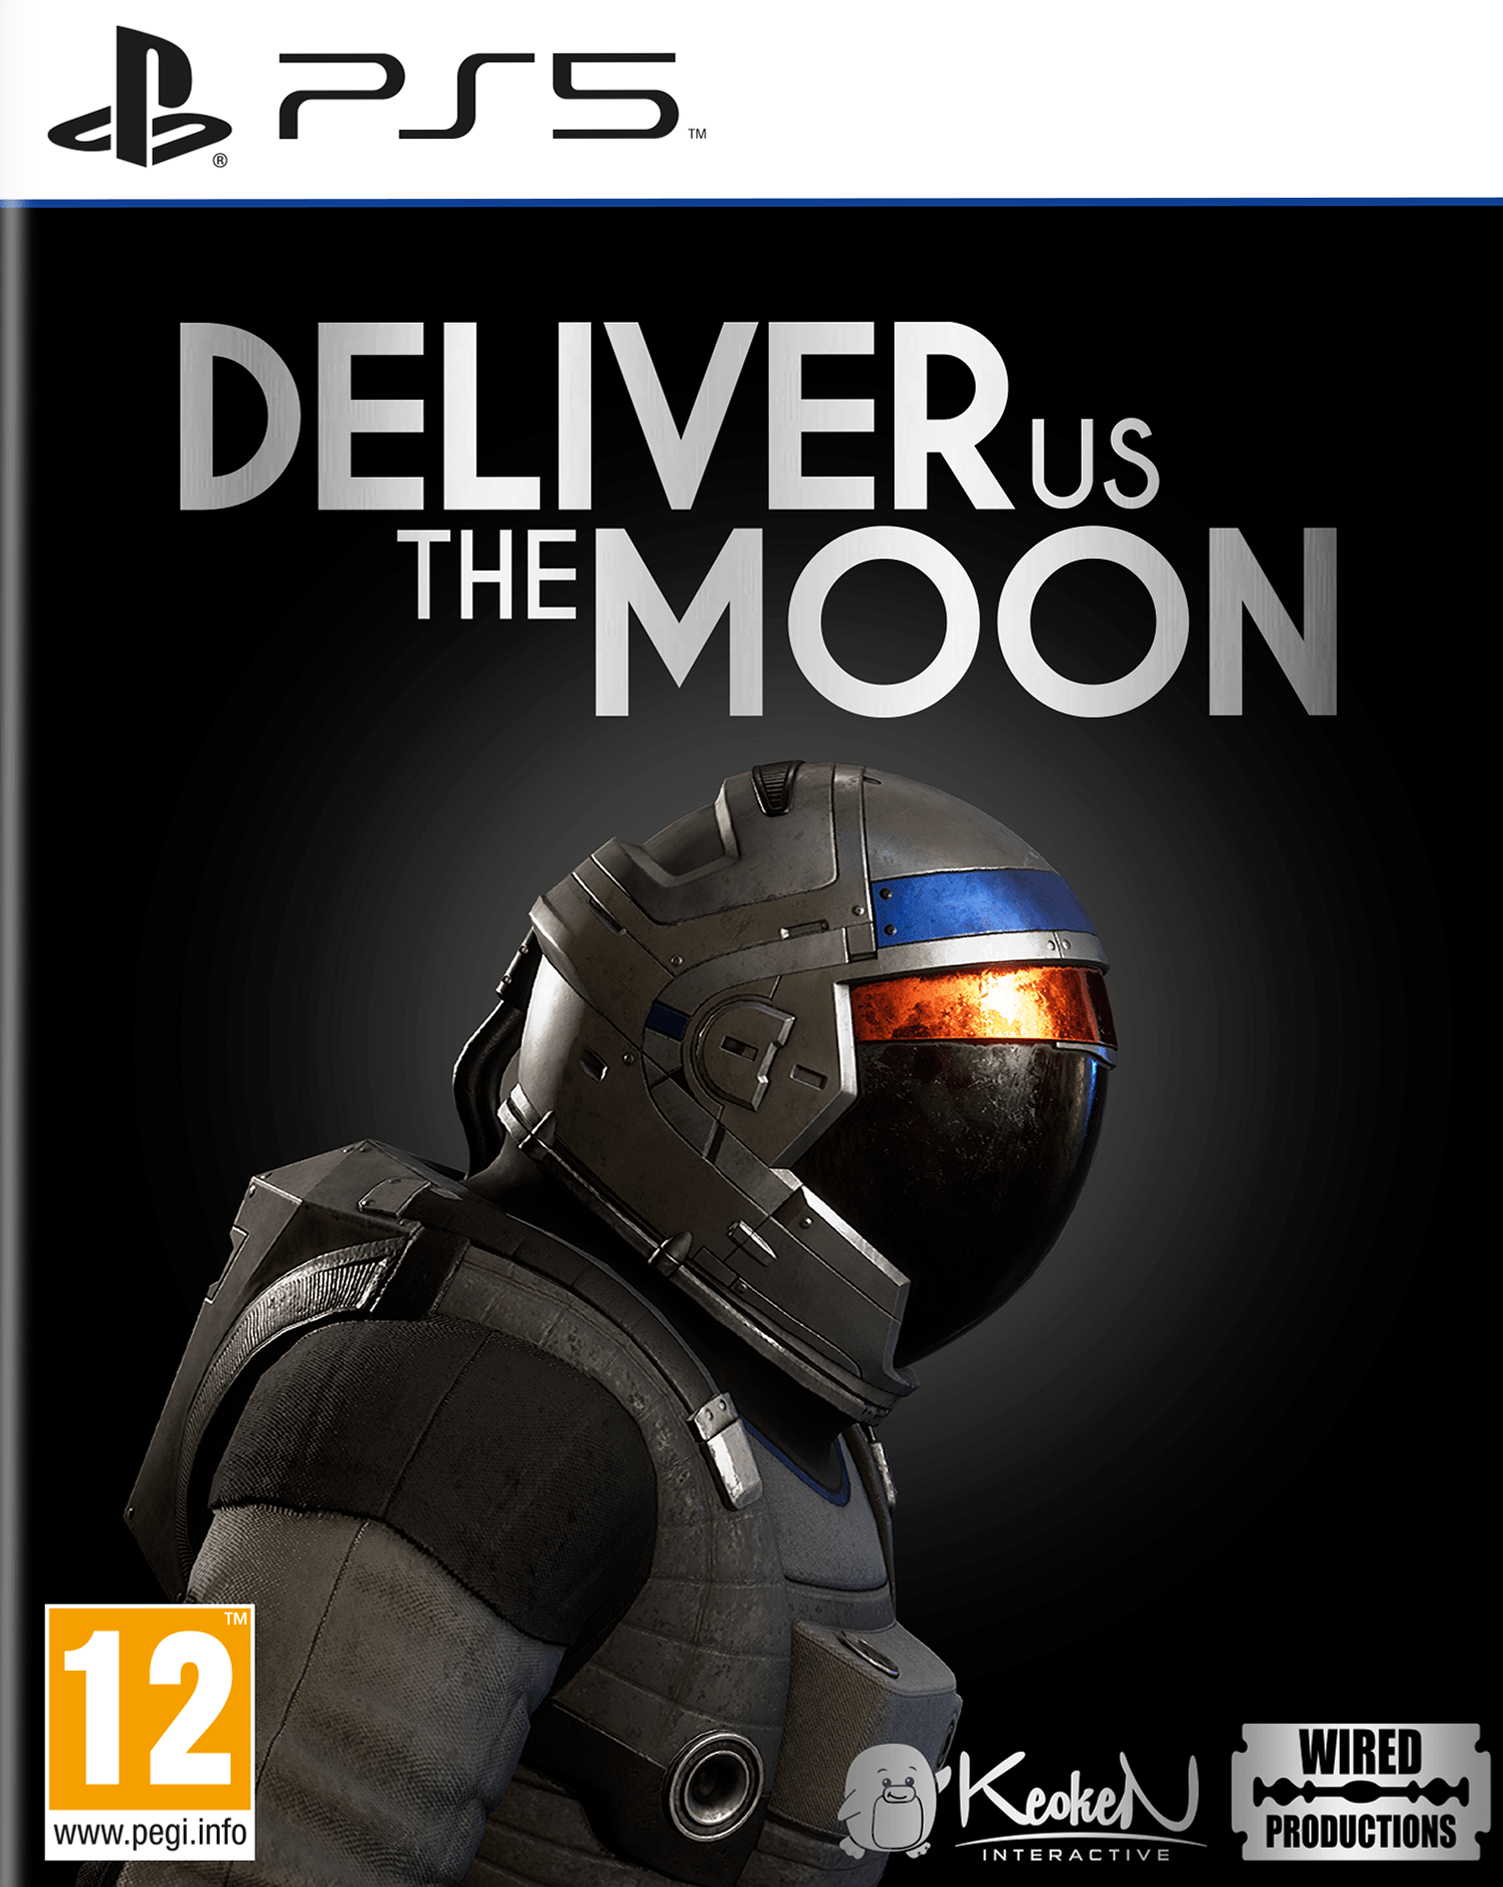 Deliver Us The Moon - Want a New Gadget